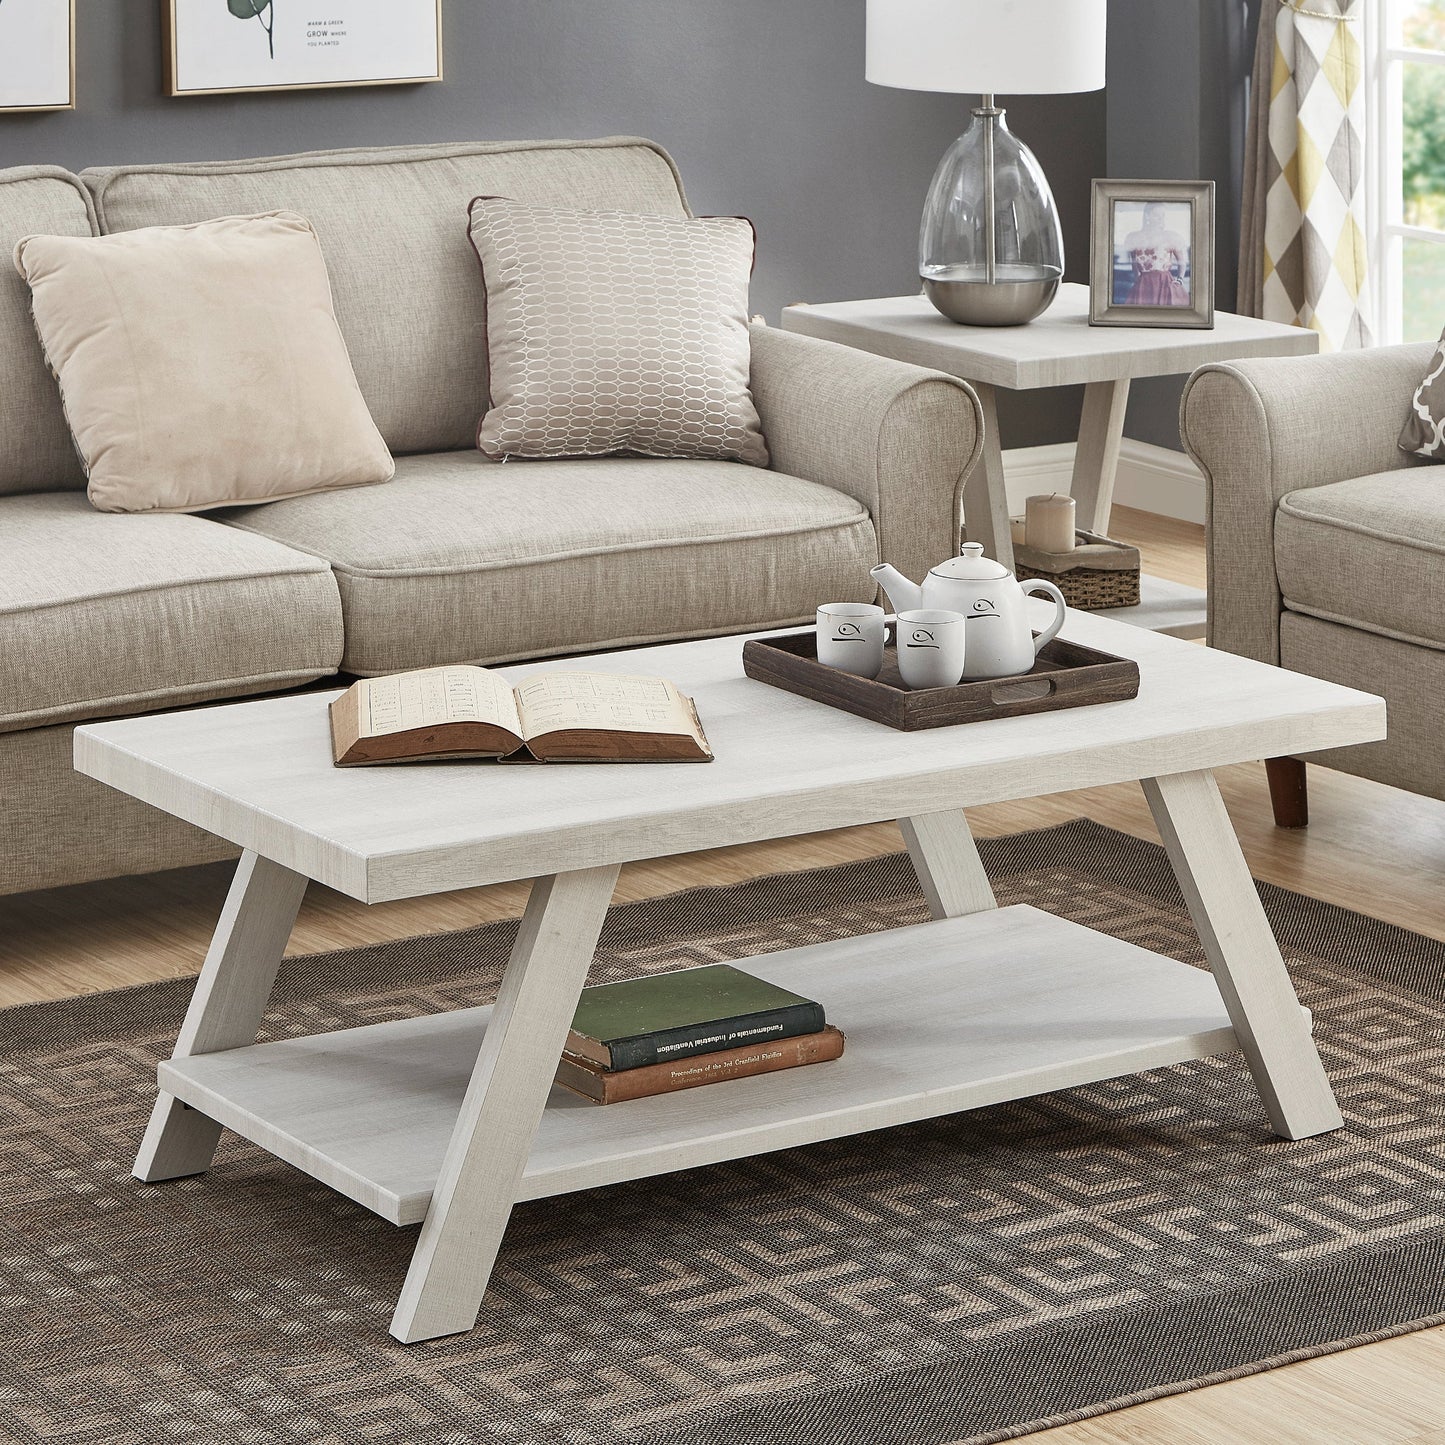 Athens Contemporary Wood Shelf Coffee Table Set in White Finish